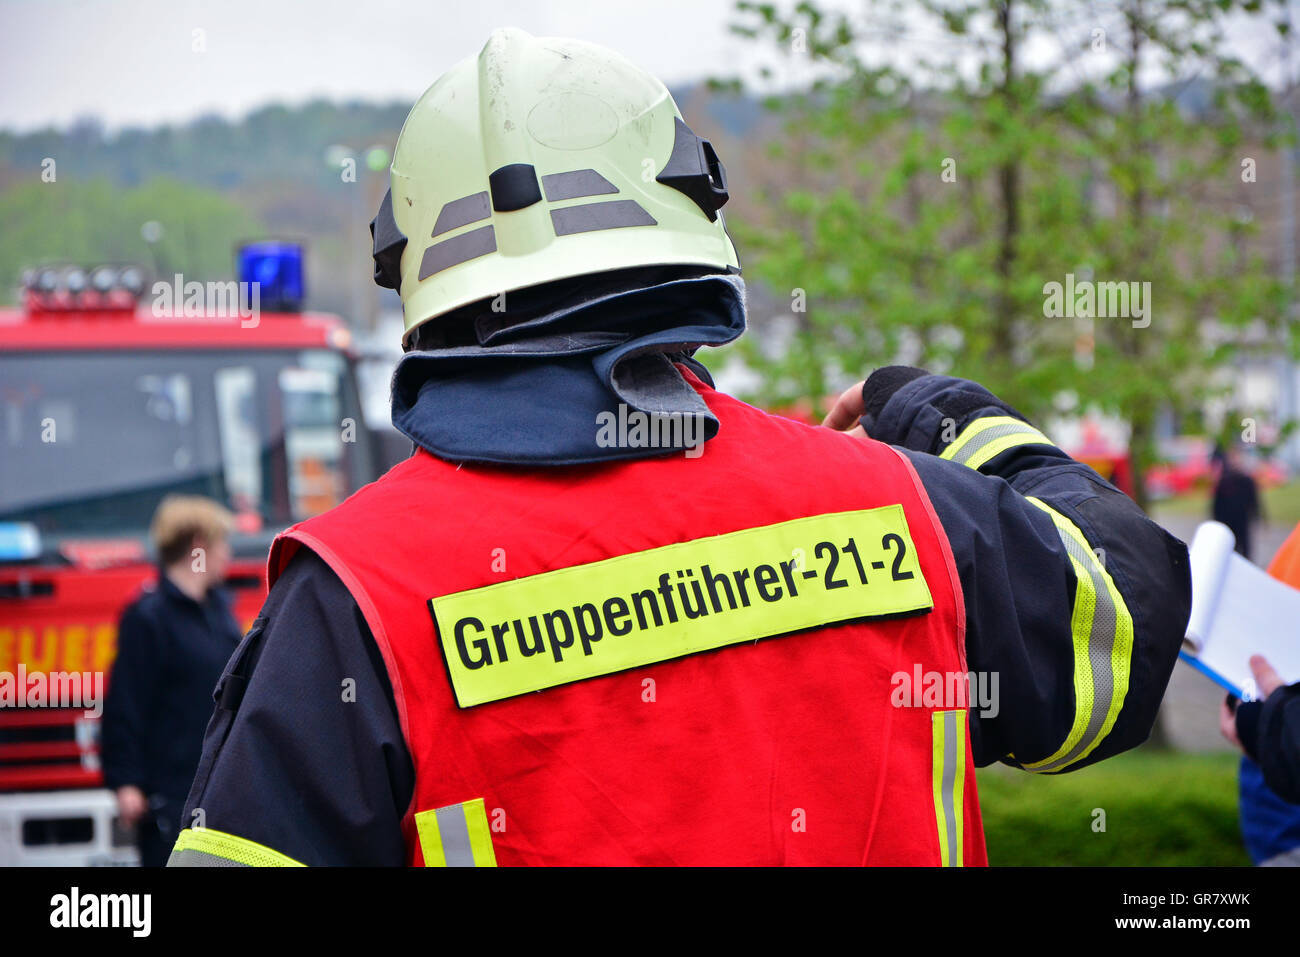 One Male Firefighter During Training On The Road Stock Photo